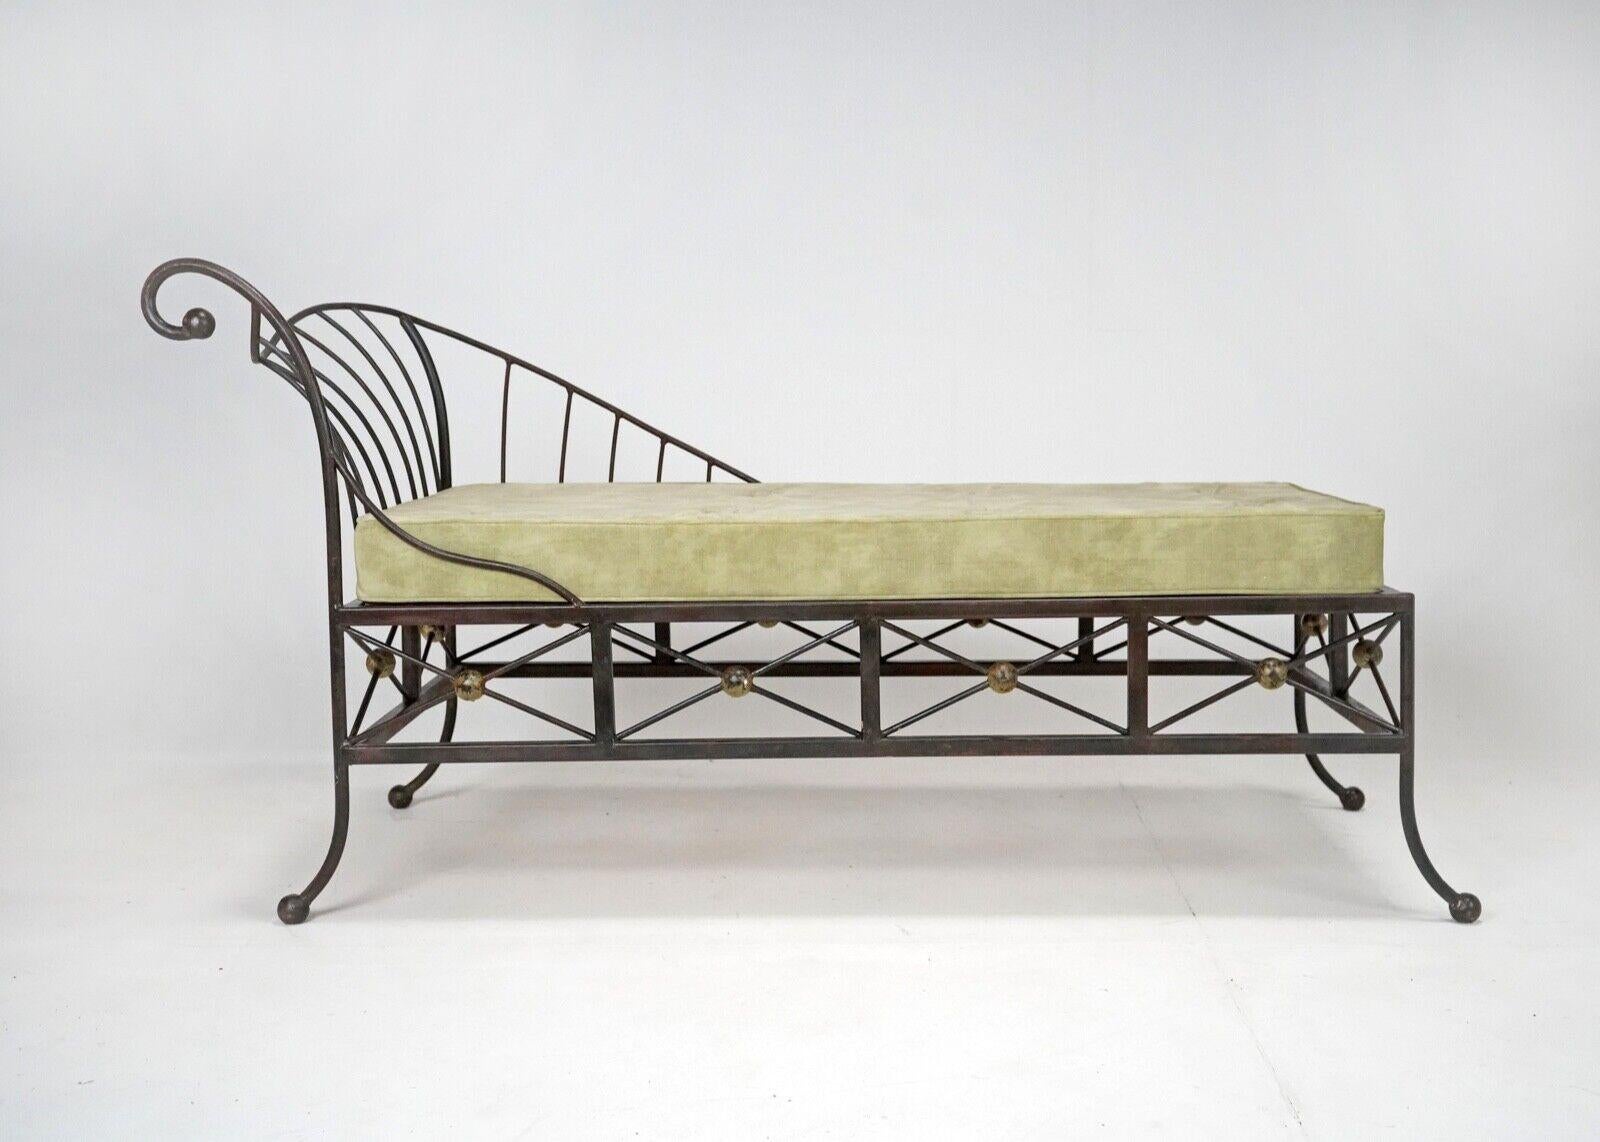 Vintage French Box Steel Metal Day Bed, Sun Lounger, Chaise Lounge Green Seat 4